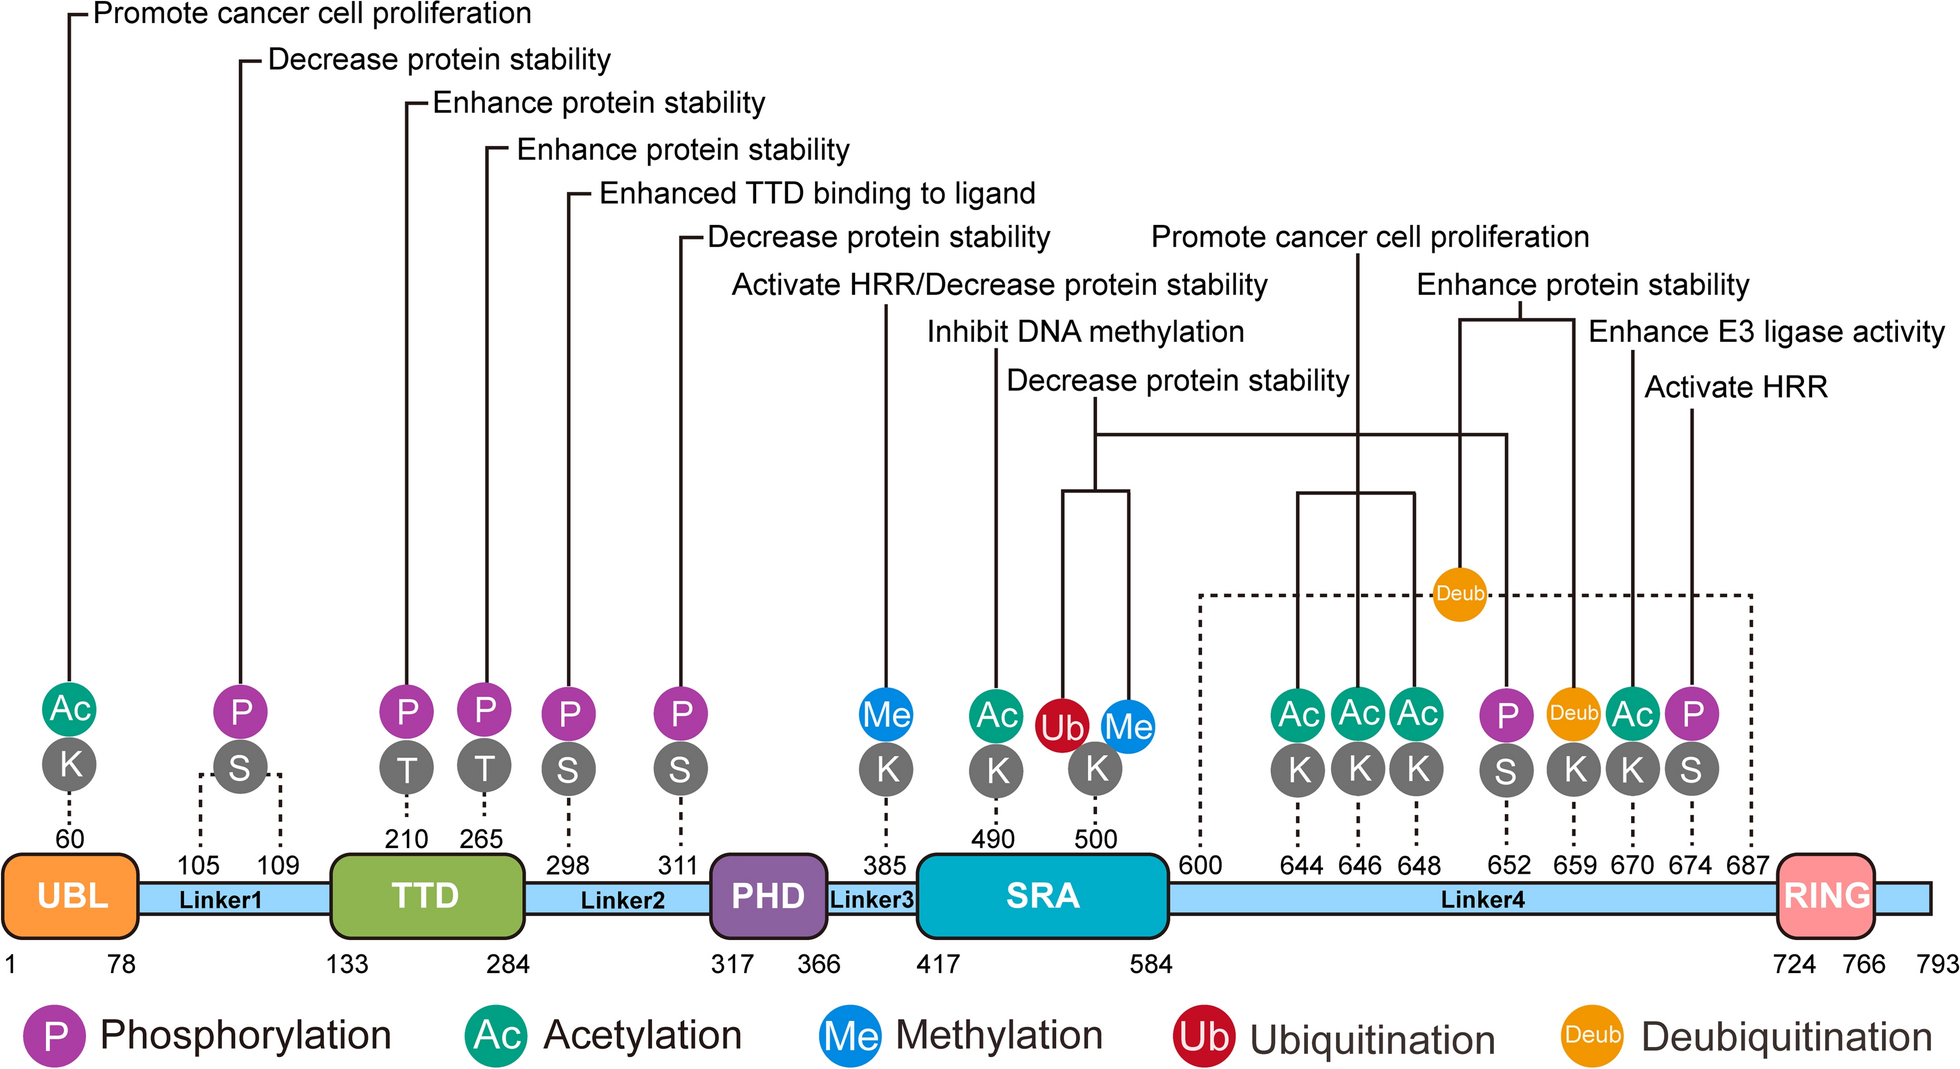 Roles of post-translational modifications of UHRF1 in cancer